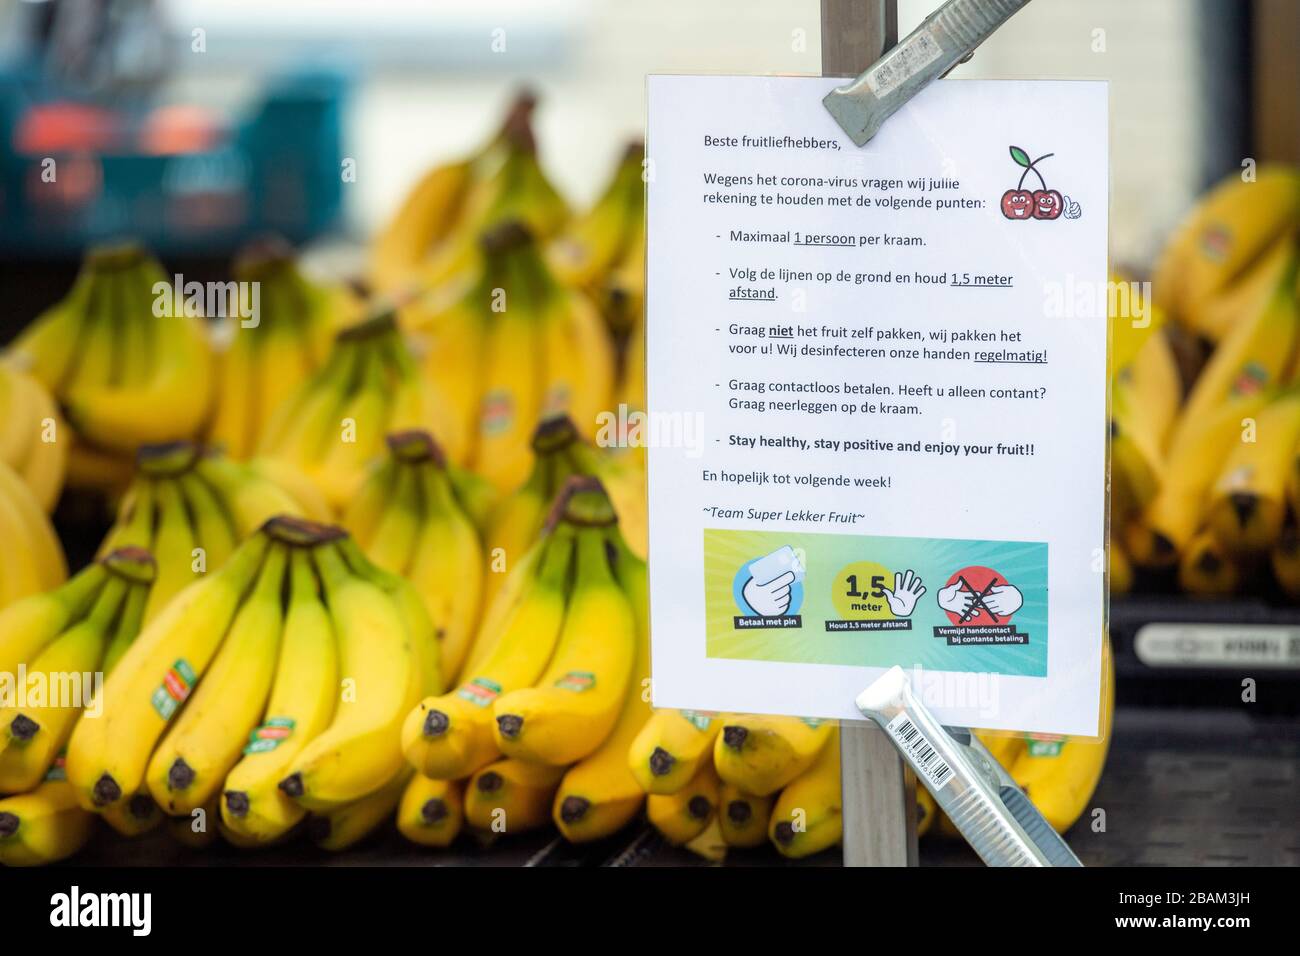 Coronavirus sign explaining rules on hygiene and social distancing on a fruit stall at an outdoor market in Veenendaal, the Netherlands Stock Photo